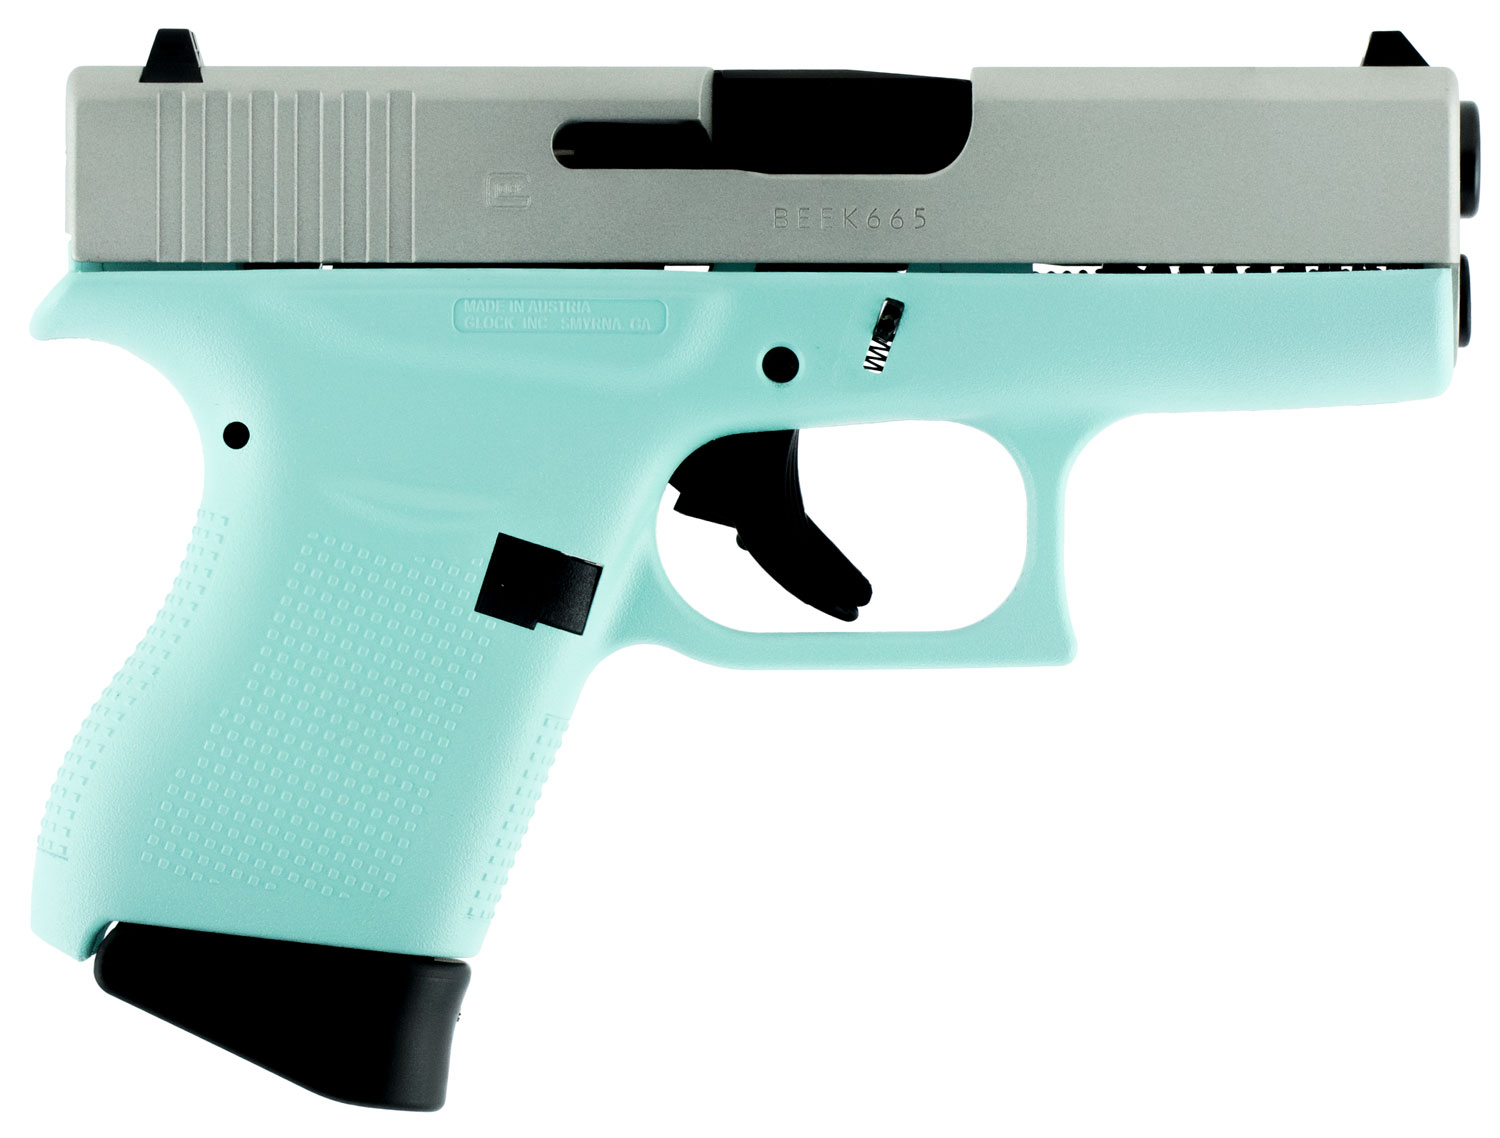 Glock PI4350201RES G43 Subcompact Double 9mm Luger 3.39 Inch 61 Robin Egg Blue Polymer Grip/Frame Silver Aluminum Cerakote | 682146001921